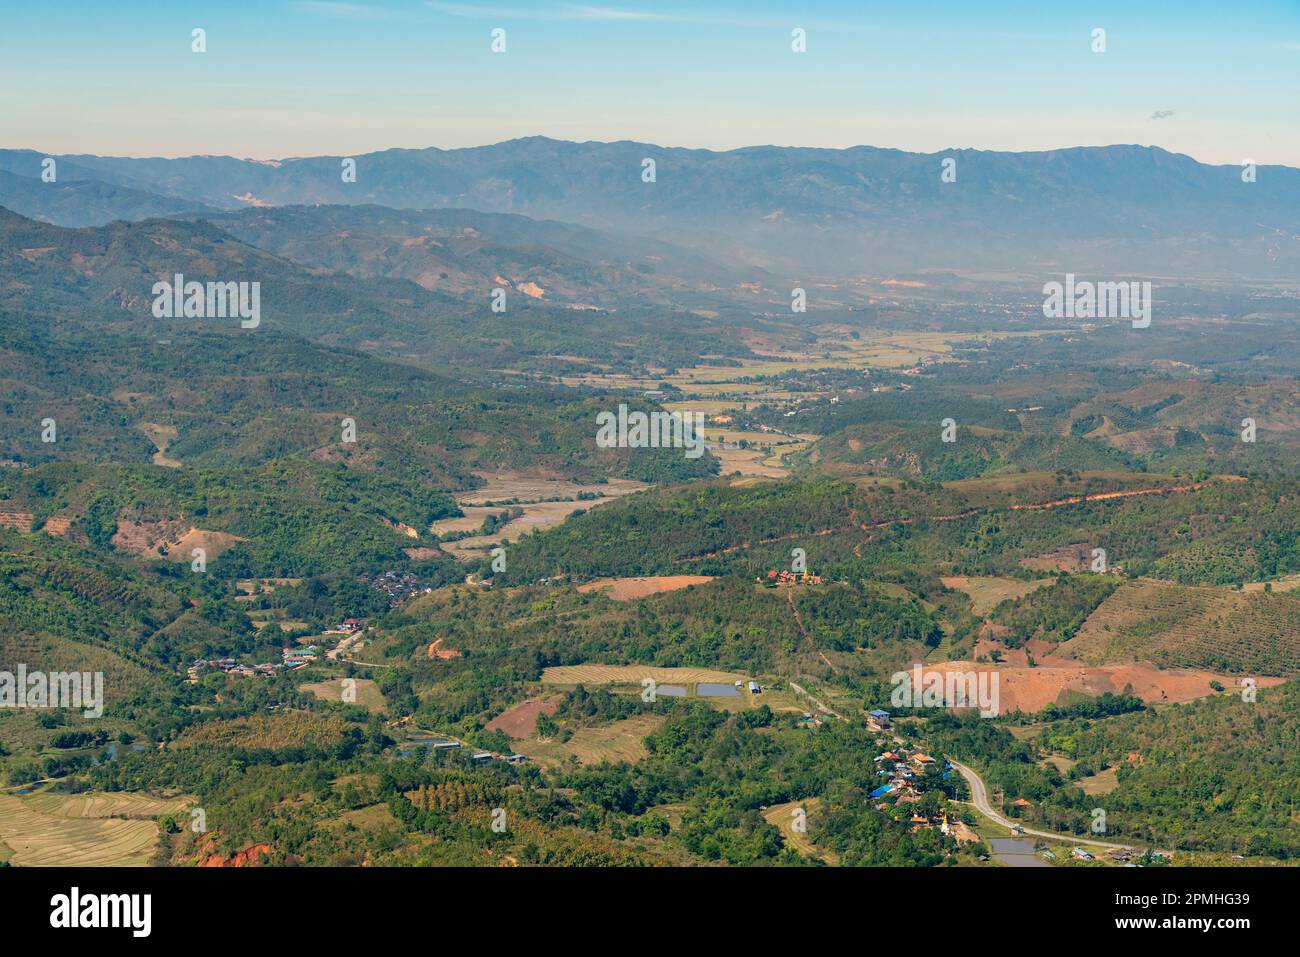 Scenic view of mountains near Kengtung, Shan State, Myanmar (Burma), Asia Stock Photo